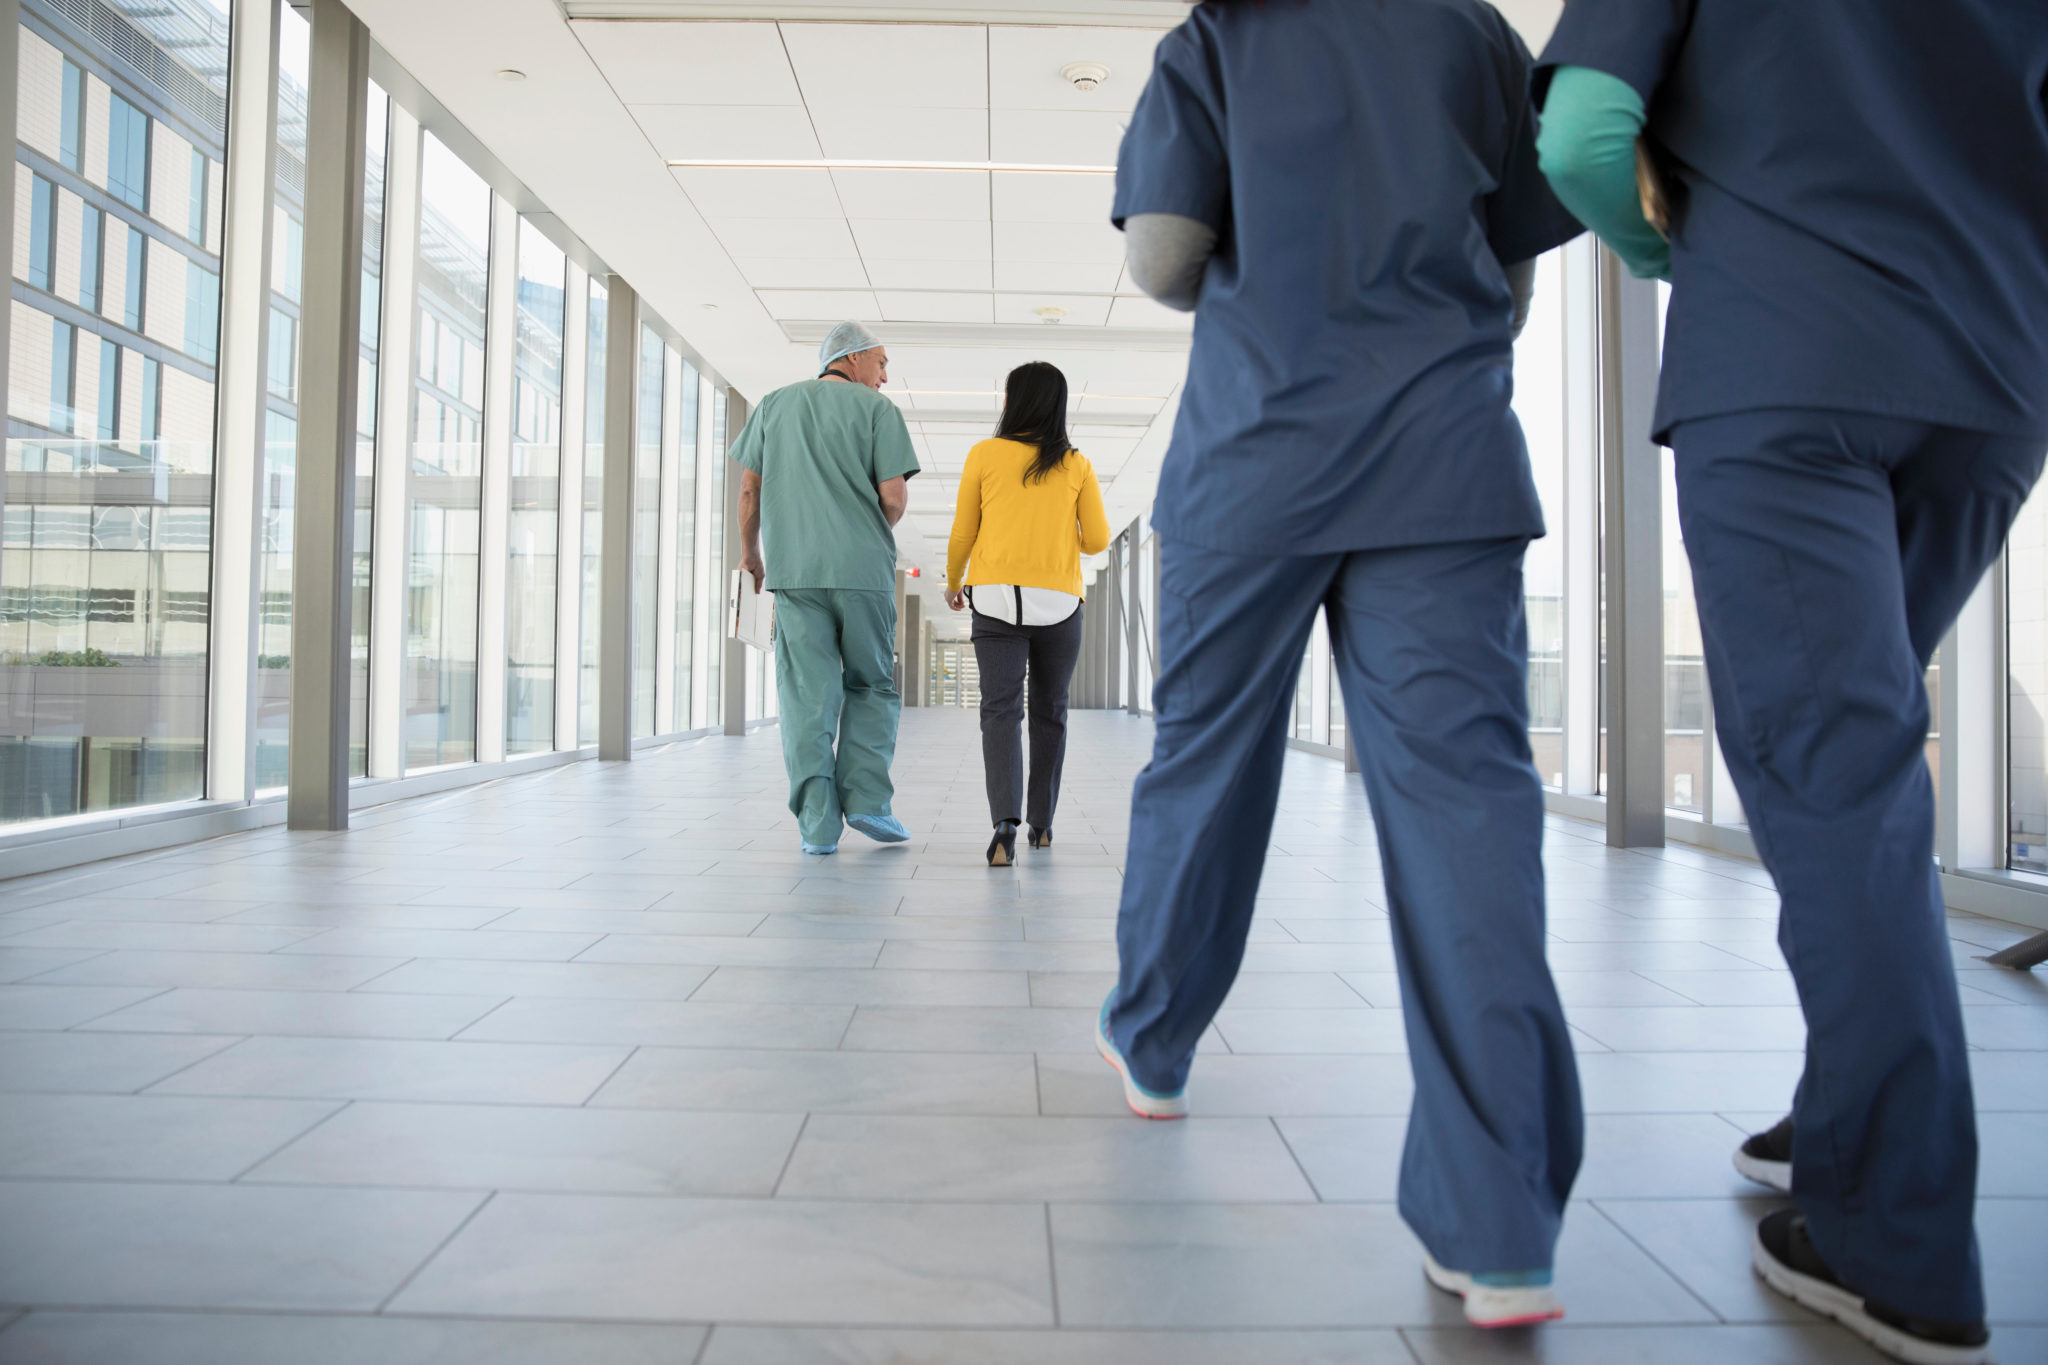 A surgeon, doctor and nurses walking in a hospital corridor in October 2017.